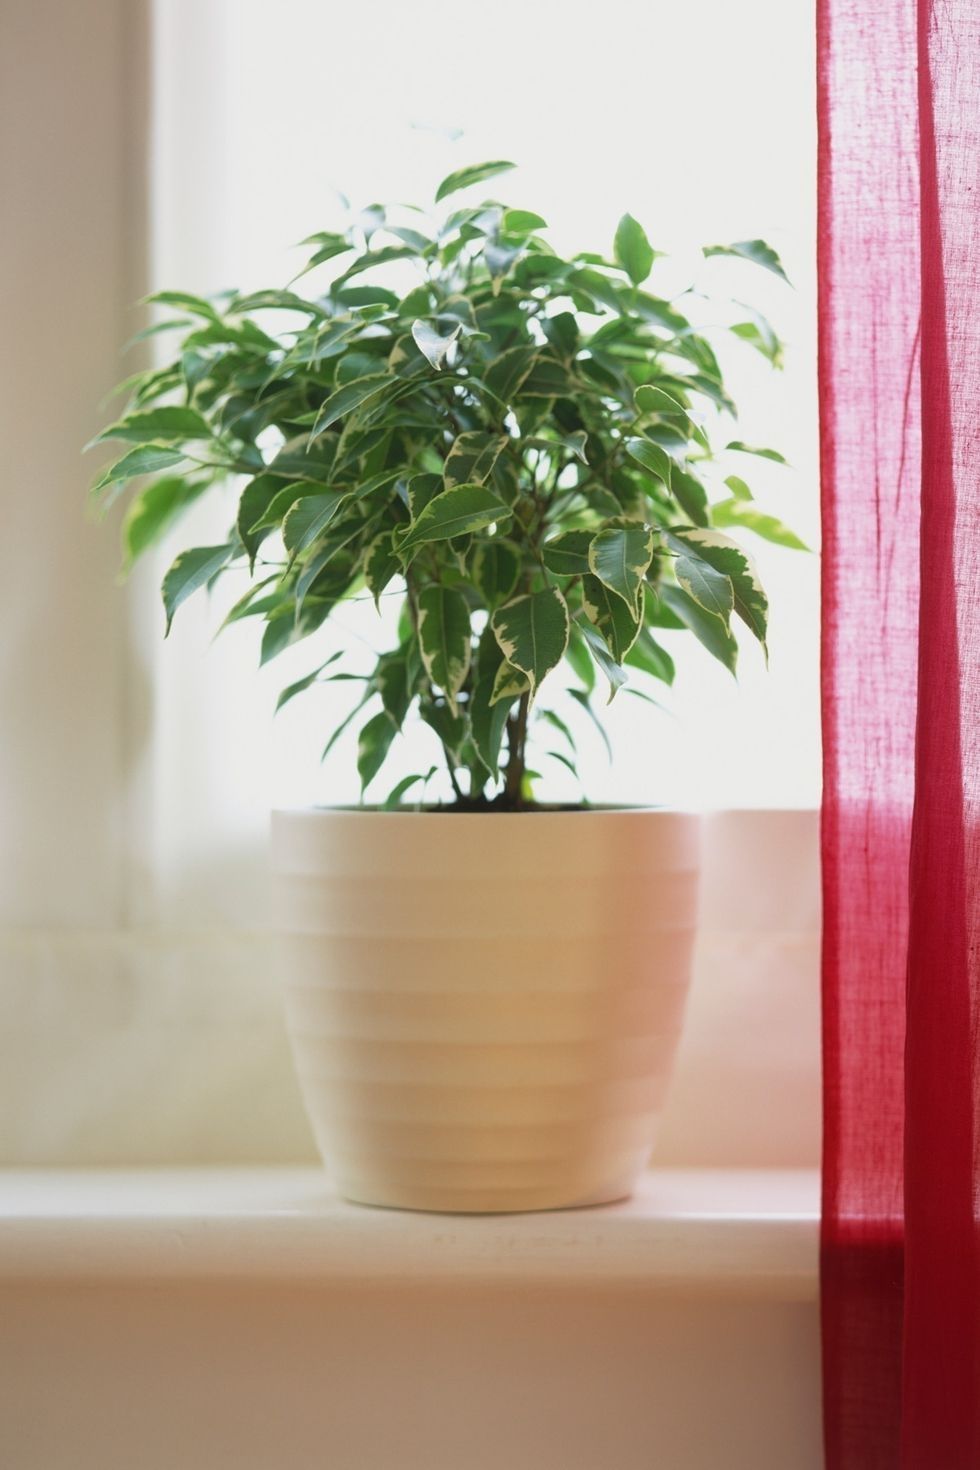 <p><strong data-redactor-tag="strong" data-verified="redactor">Care level:</strong> Intermediate</p><p>Bright but indirect light is best for this plant, which people often put in common spaces of their homes, like the <a href="http://www.housebeautiful.com/lifestyle/gardening/a8439/houseplant-cheat-sheet/" data-href="http://www.housebeautiful.com/lifestyle/gardening/a8439/houseplant-cheat-sheet/" target="_blank">living room</a>. Water it every few days to keep the soil moist at all times. Since this plant is full and features many leaves, opt for a simple, white pot.<span data-redactor-tag="span" data-verified="redactor"></span></p><p><a href="https://www.amazon.co.uk/Ficus-benj-Kinky-Houseplant-Weeping/dp/B00VFV3NM0/ref=sr_1_7?s=outdoors&amp;ie=UTF8&amp;qid=1515603145&amp;sr=1-7&amp;keywords=Weeping+Fig" target="_blank" data-tracking-id="recirc-text-link"><strong data-redactor-tag="strong" data-verified="redactor">BUY NOW</strong></a></p>